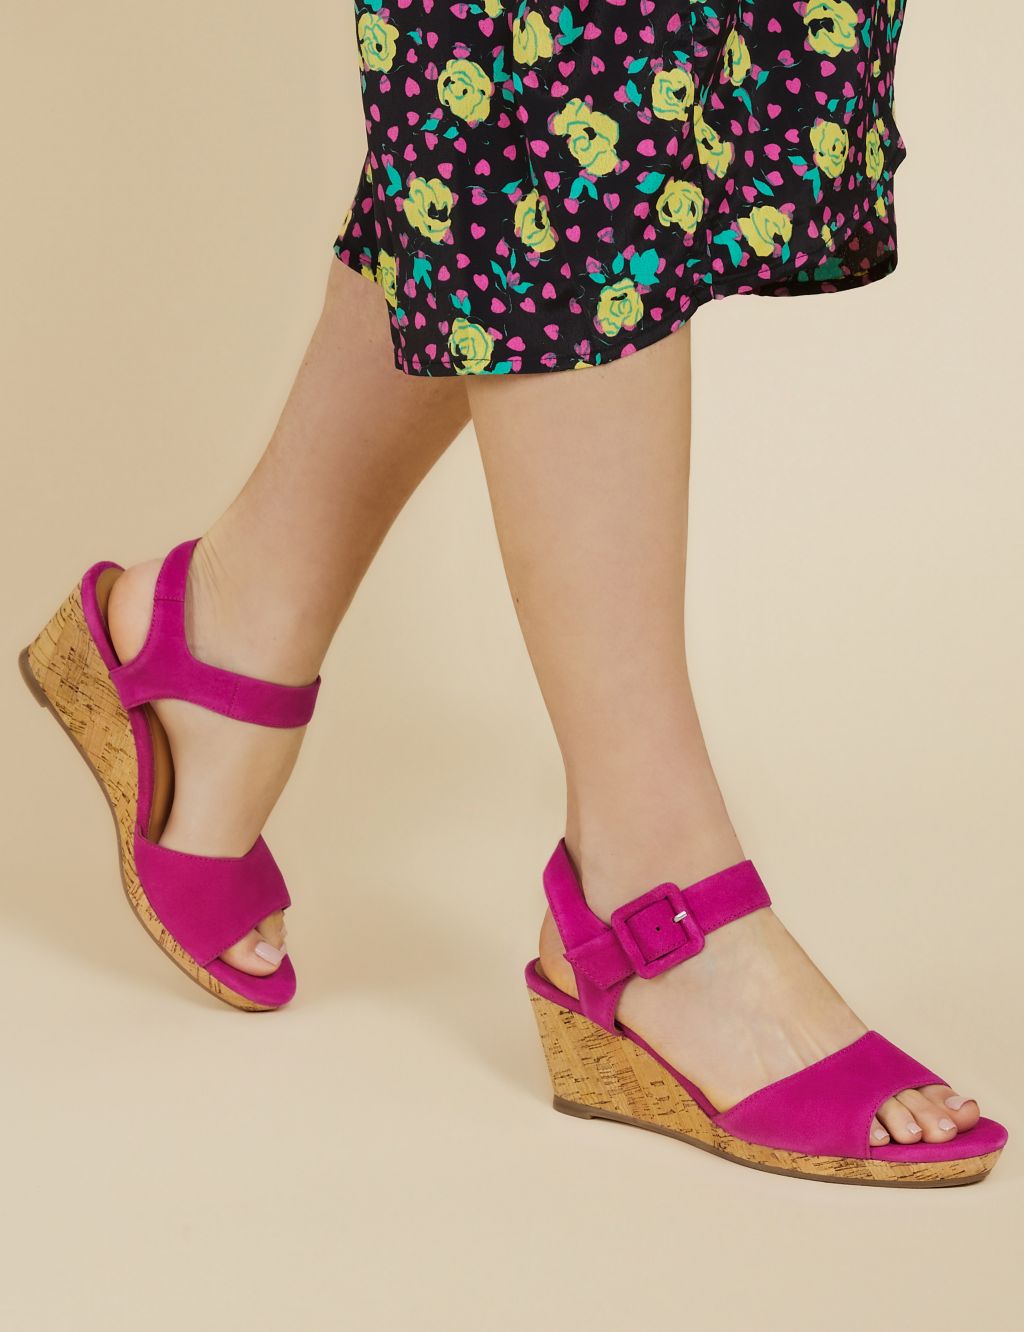 Suede Ankle Strap Wedge Sandals image 1